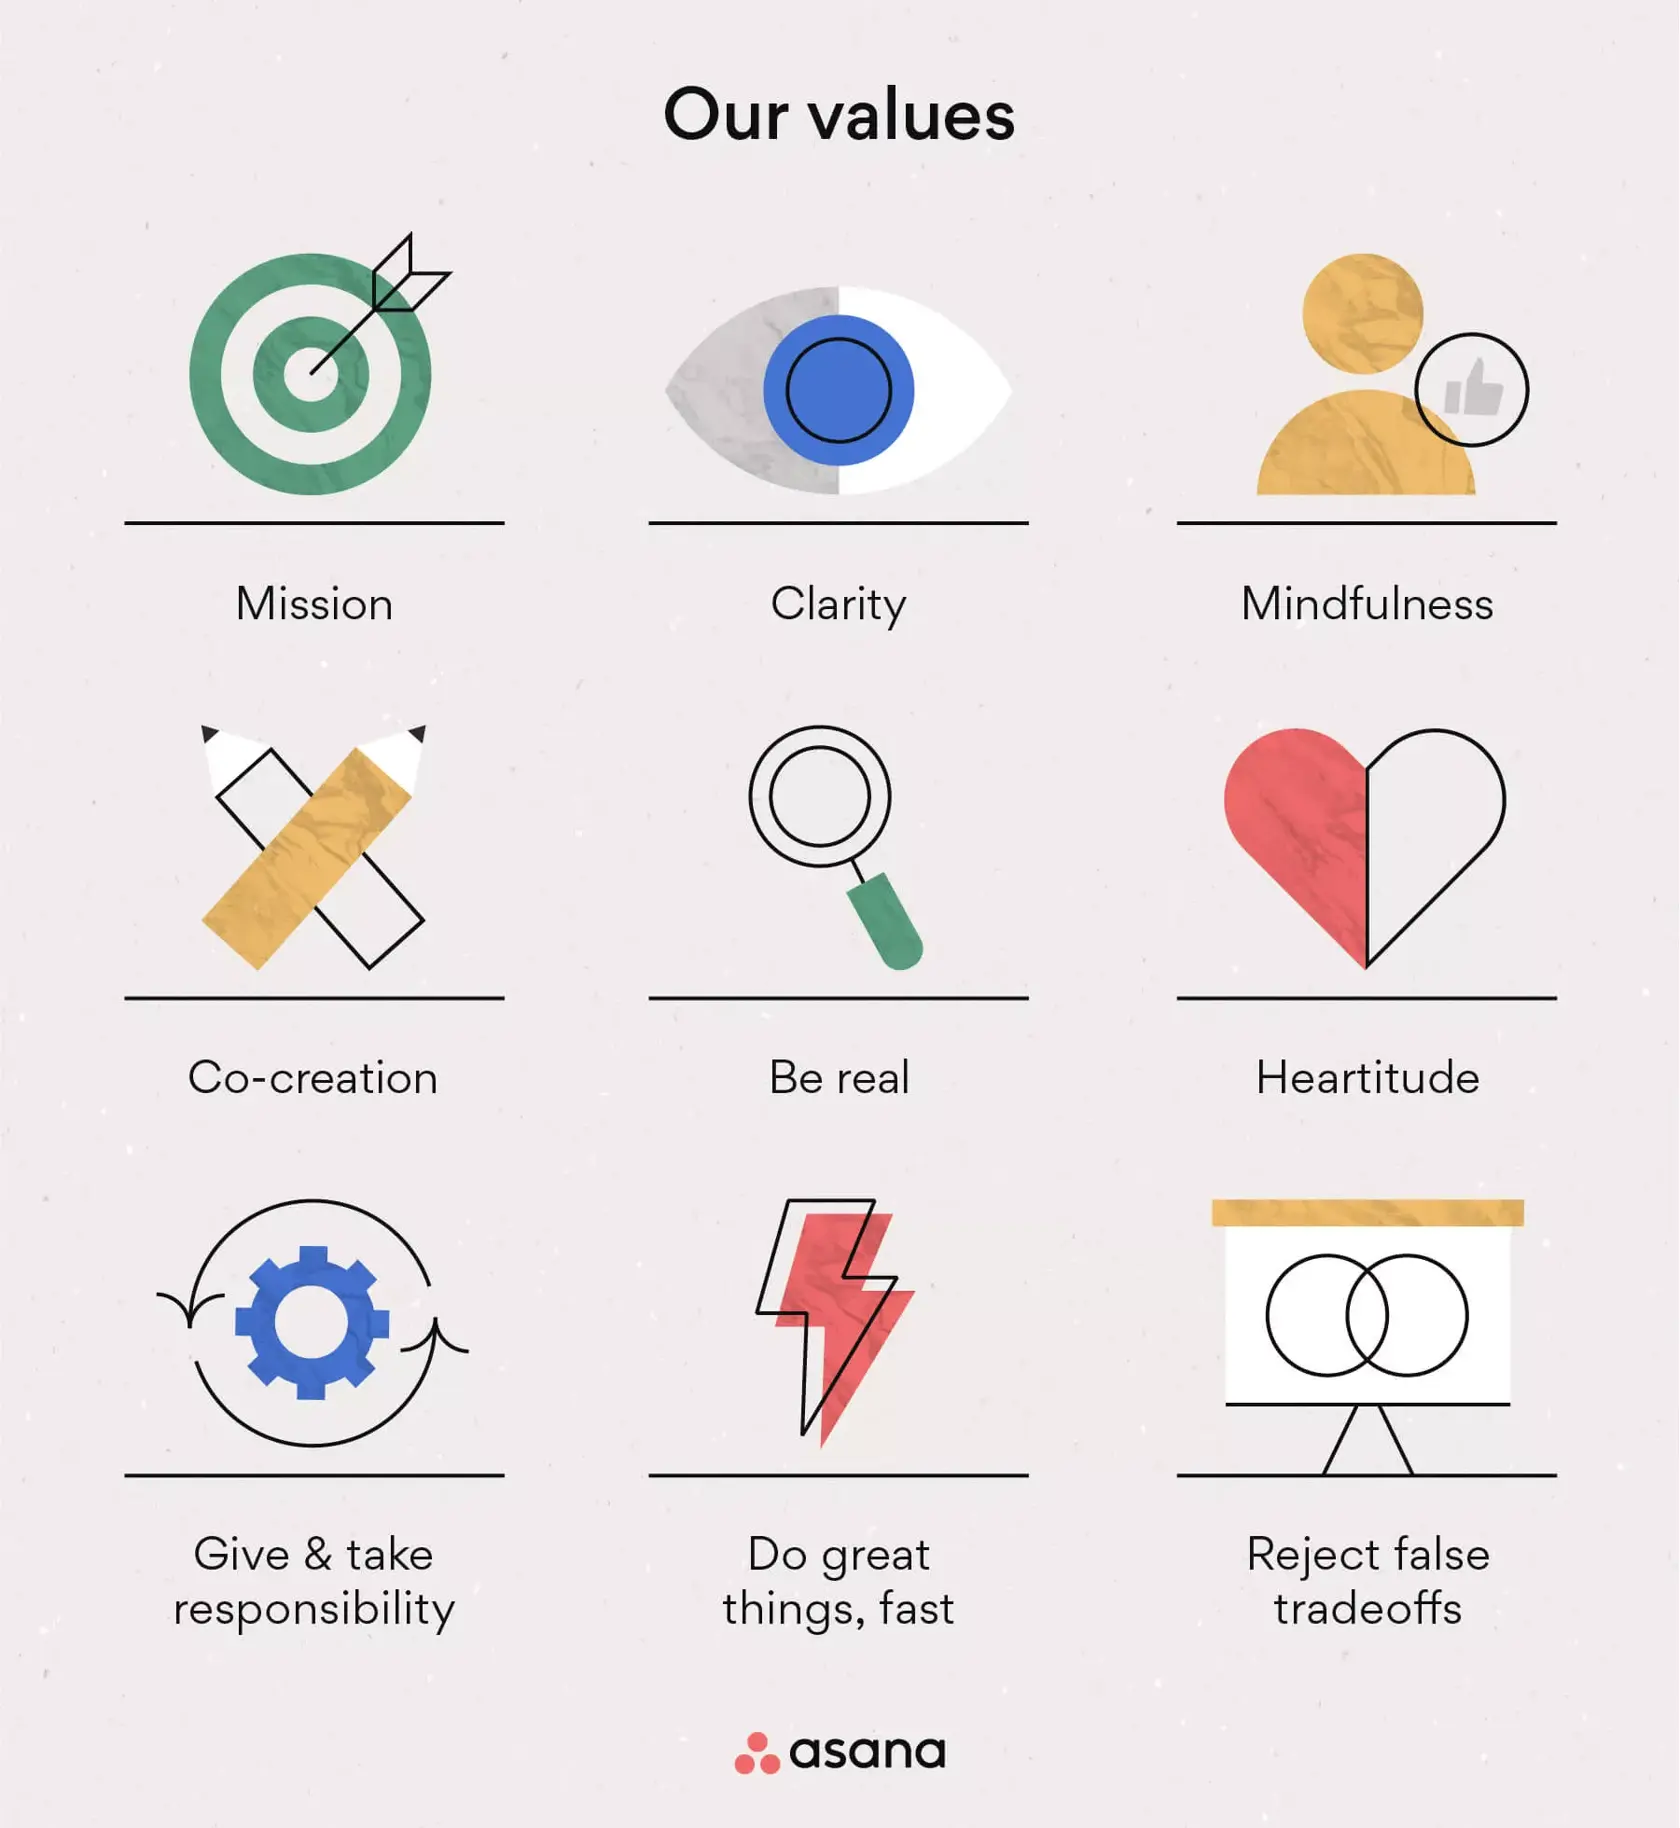 [Inline illustration] Nine Asana values: mission, clarity, give & take responsibility, mindfulness, do great things fast, co-creation, reject false tradeoffs, be real, and heartitude (infographic)